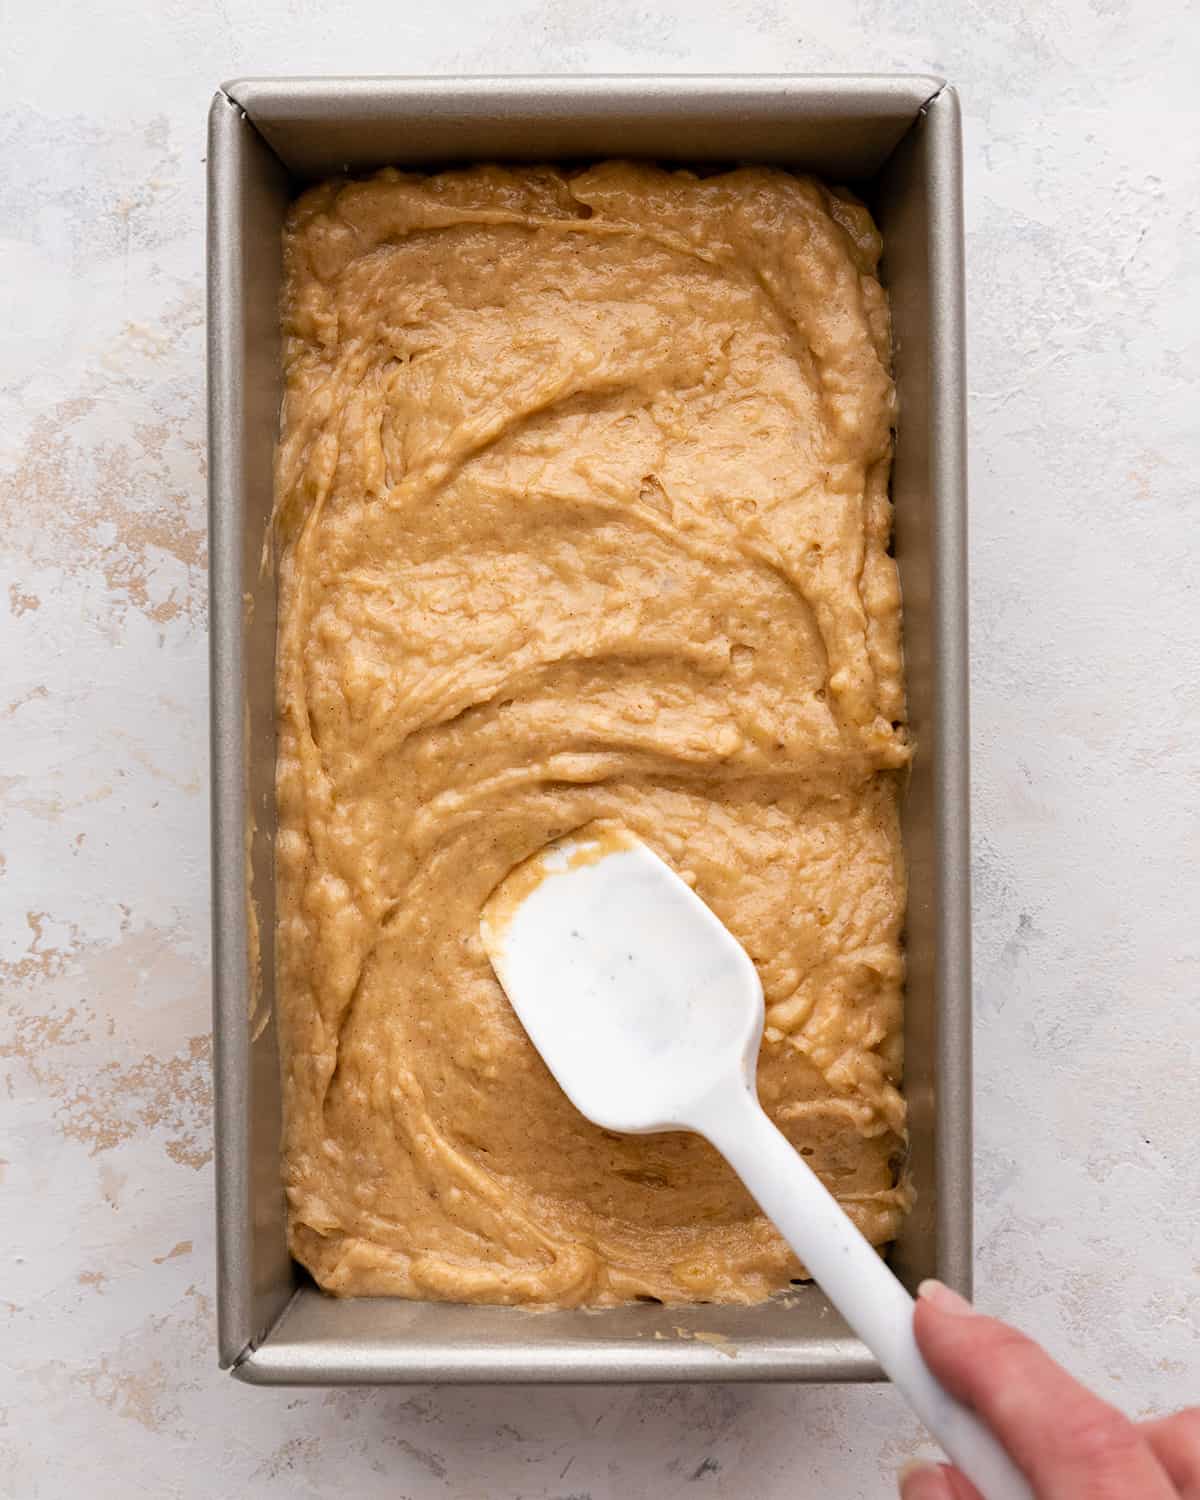 Peanut Butter Banana Bread batter being spread into a baking pan